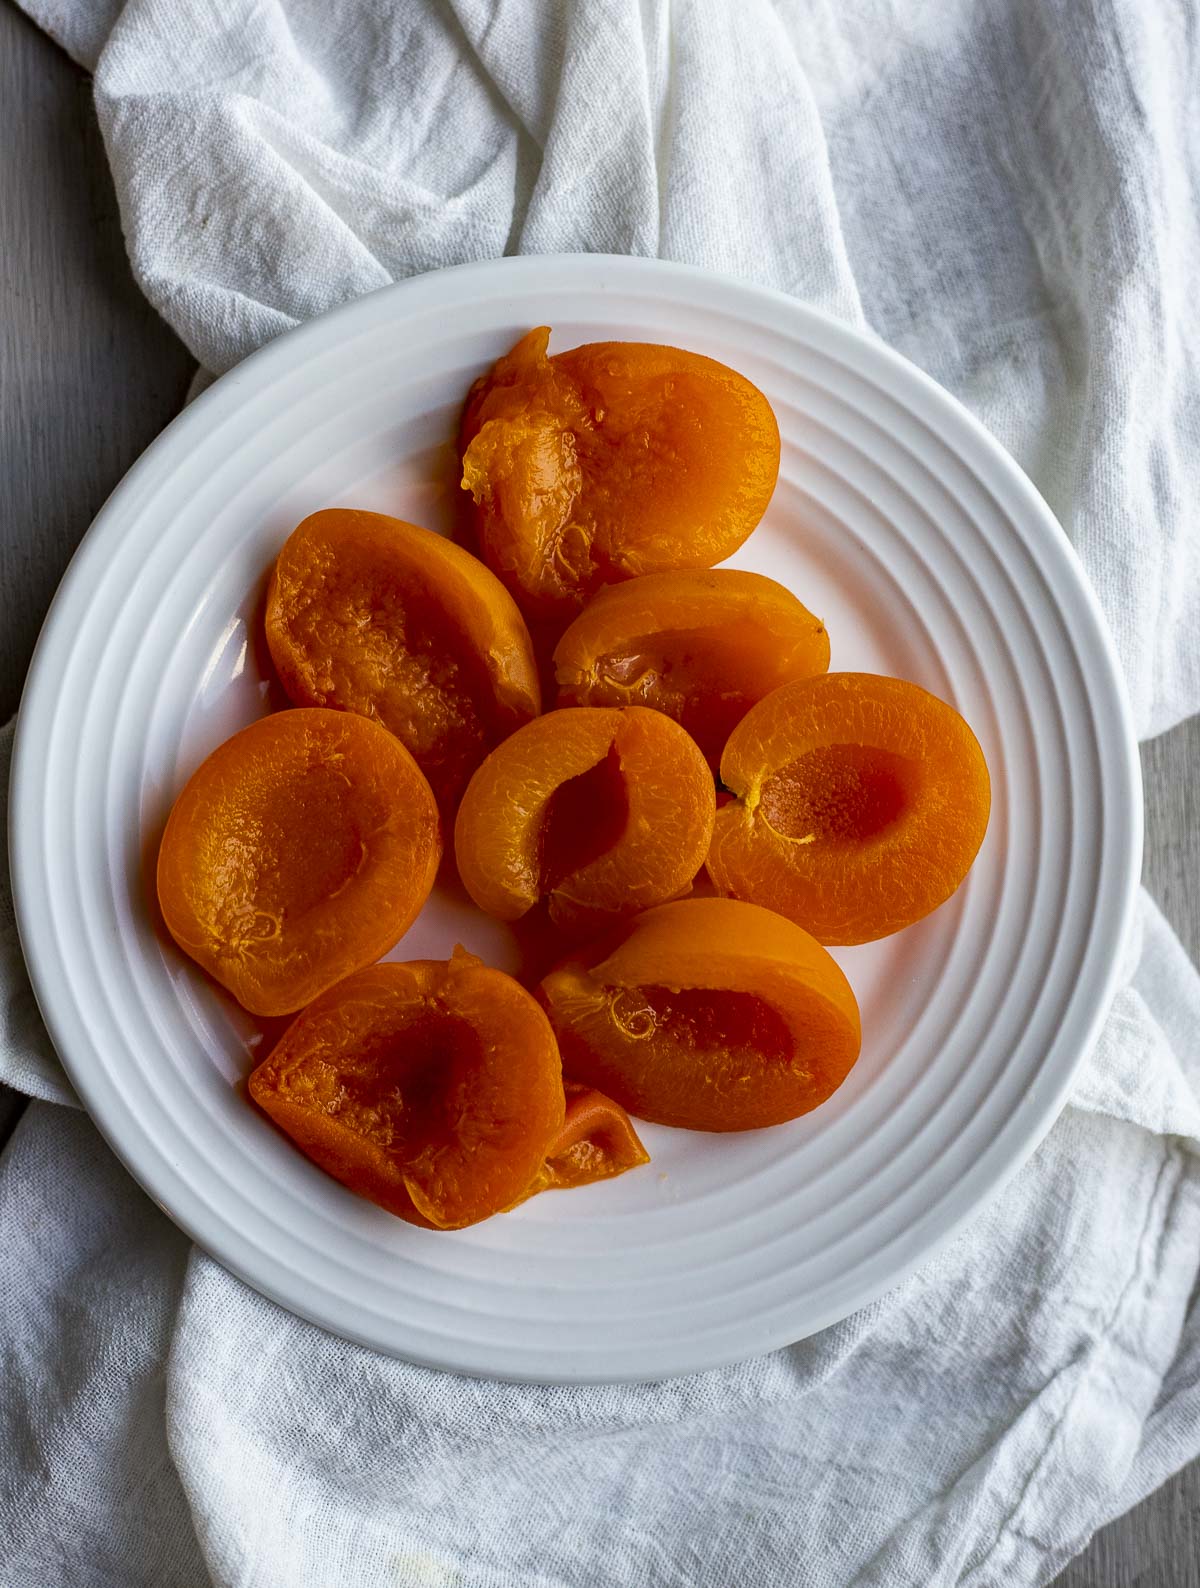 Apricot halves on a white plate.